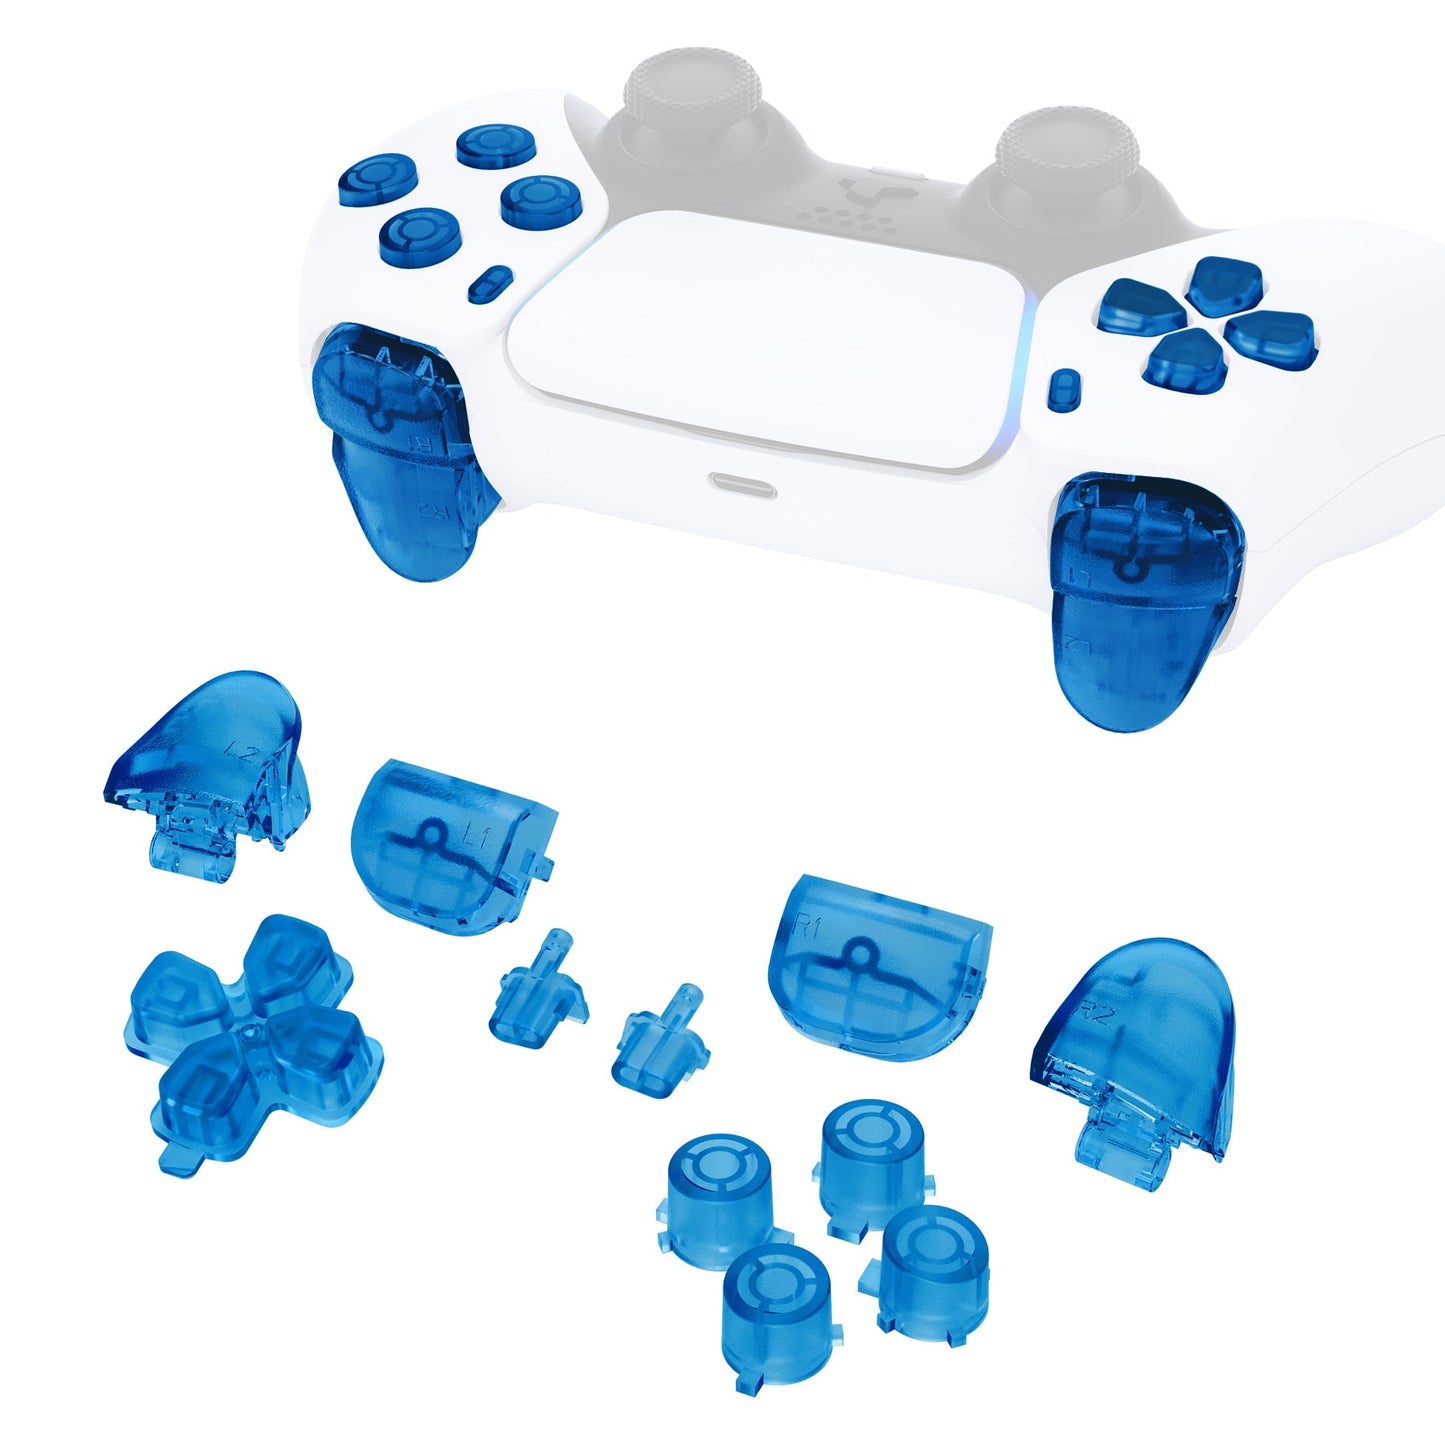 eXtremeRate Retail Replacement D-pad R1 L1 R2 L2 Triggers Share Options Face Buttons, Clear Blue Full Set Buttons Compatible With ps5 Controller BDM-010 & BDM-020 - JPF3004G2